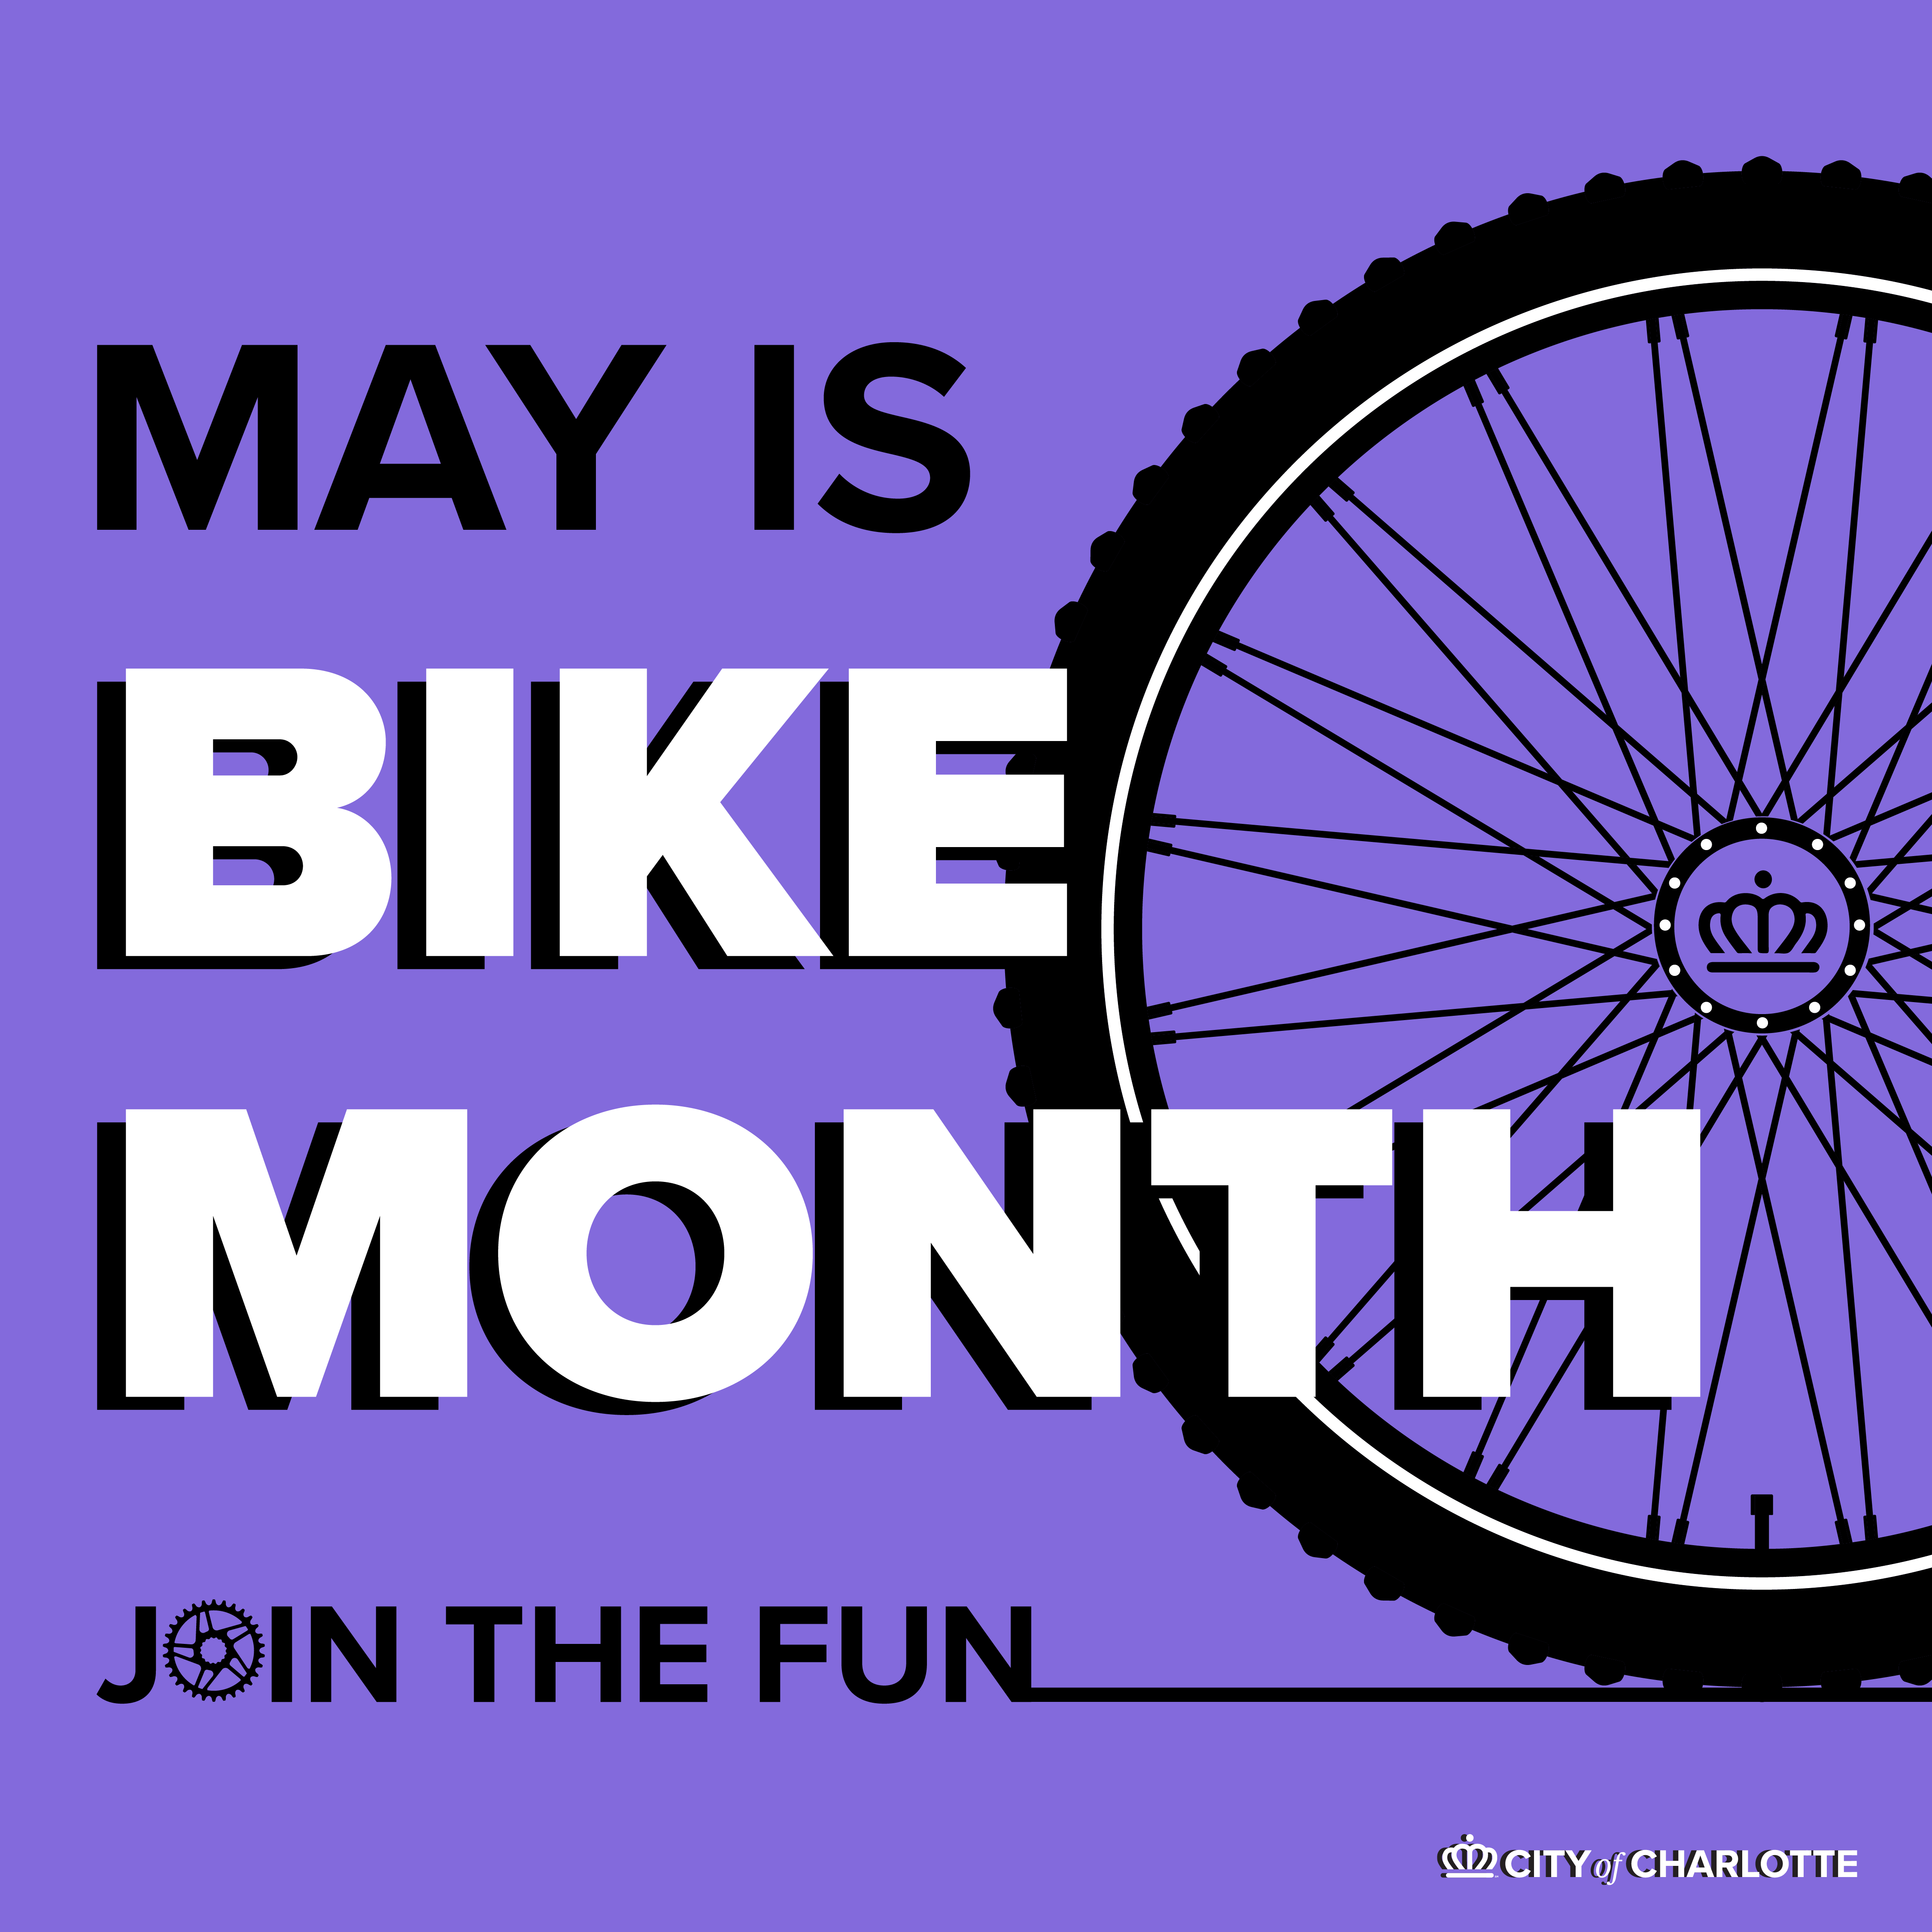 'May is Bike Month - Join the Fun' with a bike tire'